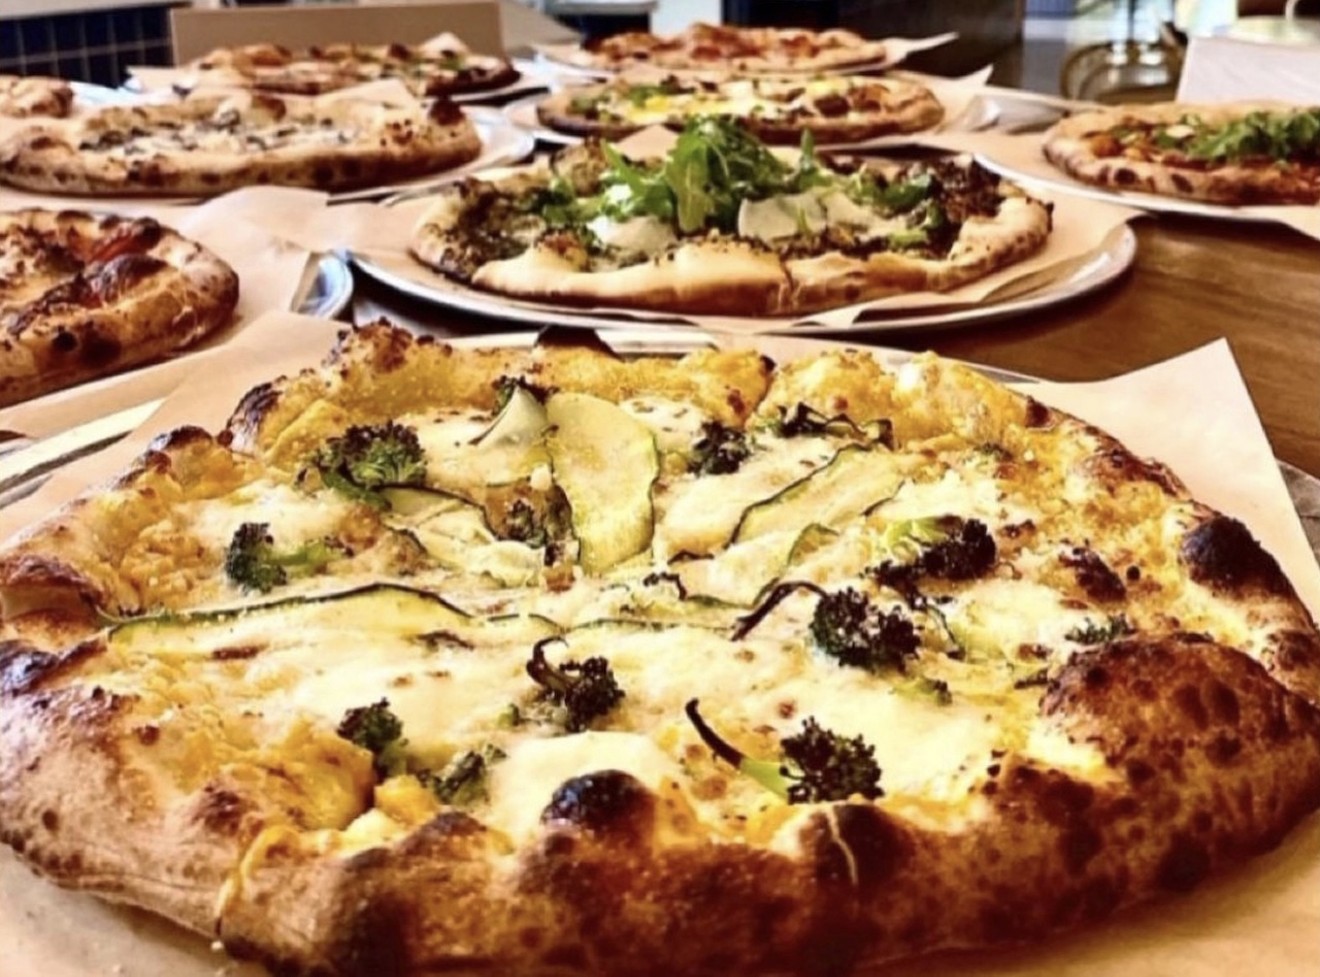 SimplyGood Pizza aims to combine food with advocacy issues.